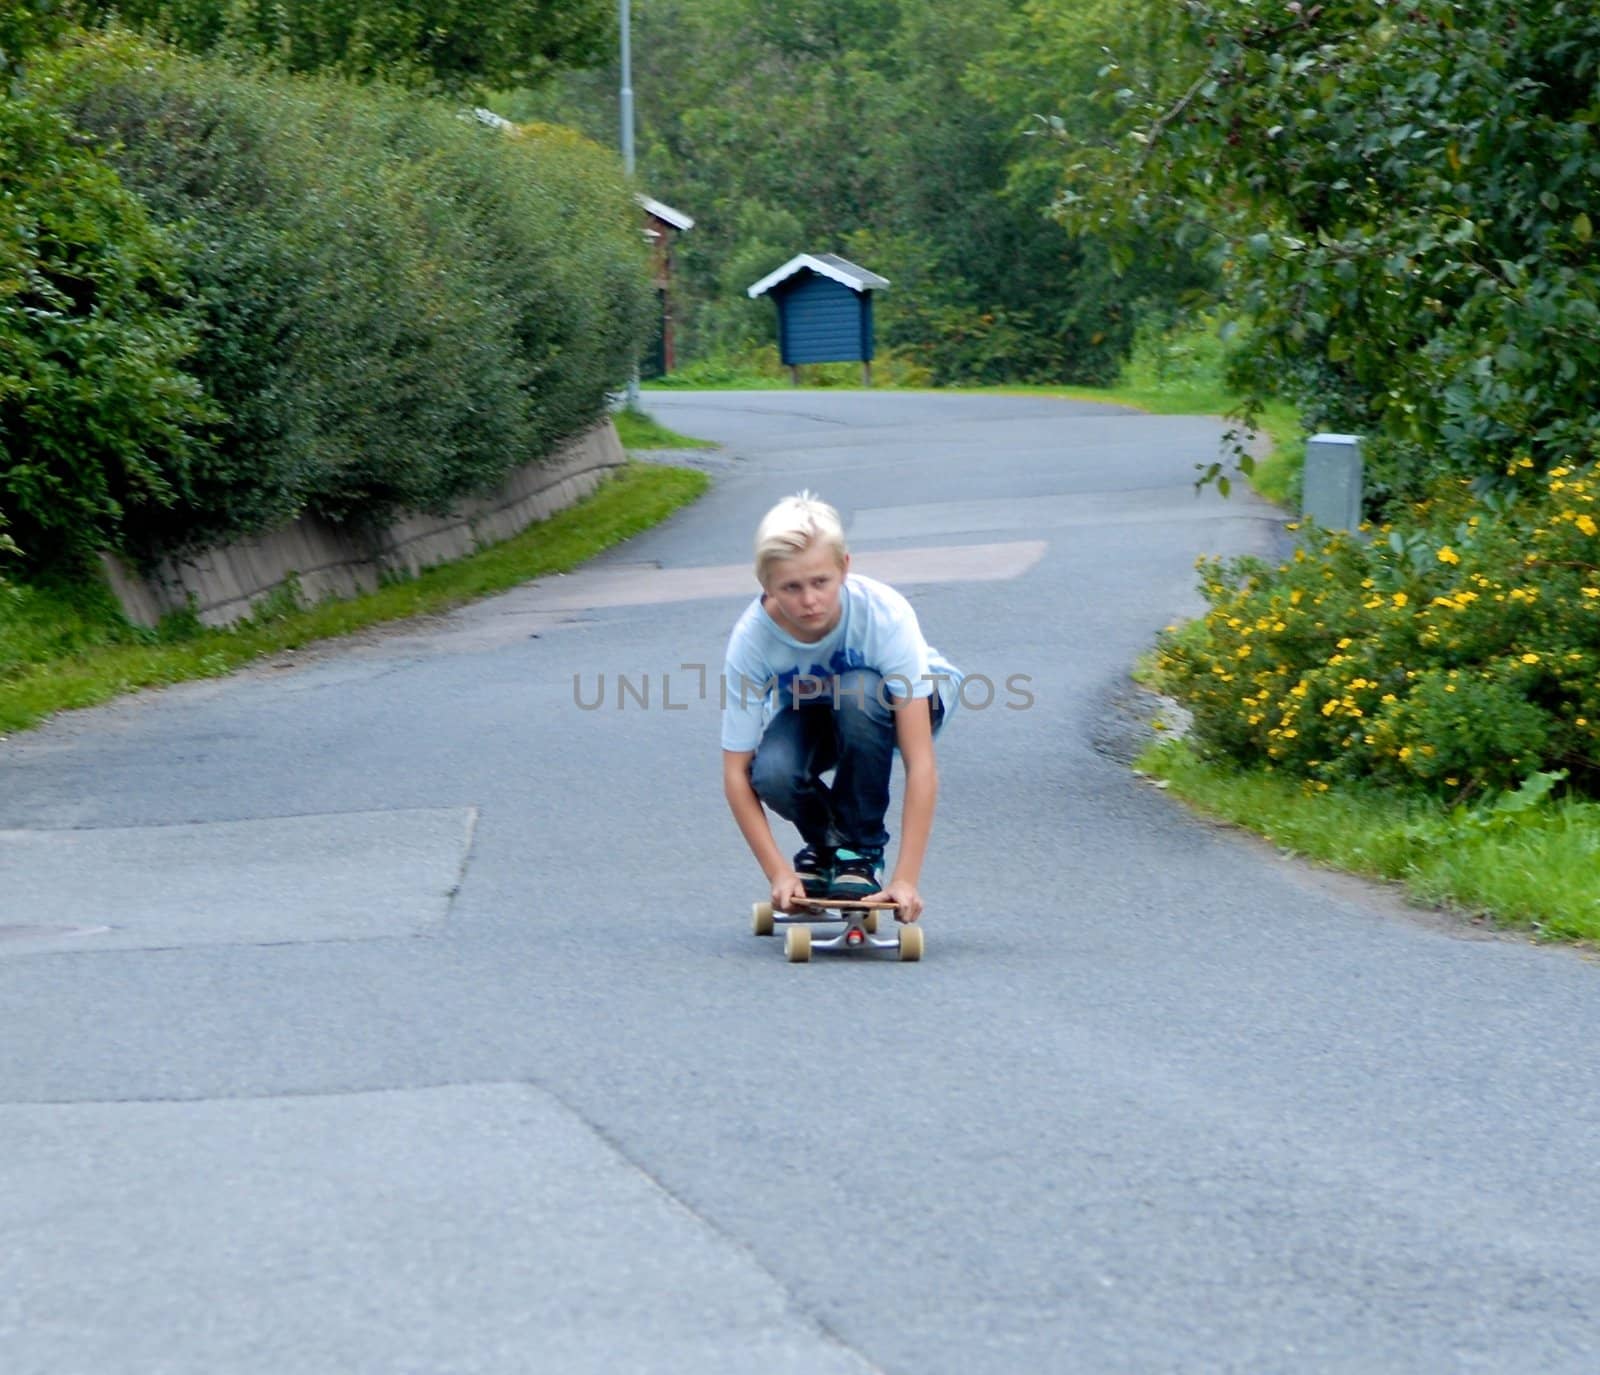 a boy practising skate board. Please note: No negative use allowed.